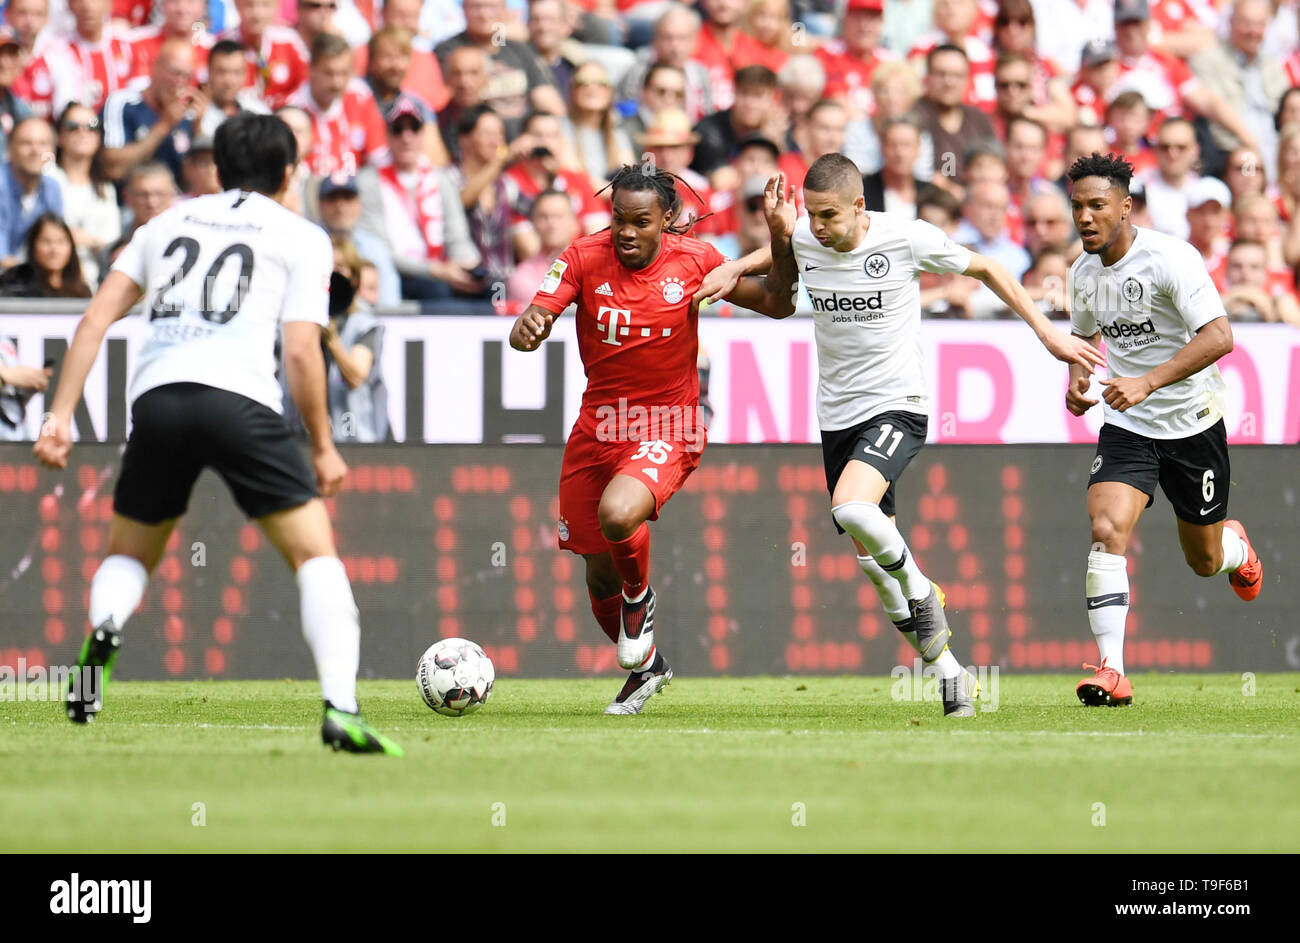 Munich, Germany. 18th May, 2019. Soccer: Bundesliga, Bayern Munich - Eintracht Frankfurt, 34th matchday in the Allianz Arena. Makoto Hasebe (l-r) from Frankfurt, Renato Sanches from Bavaria, Mijat Gacinovic from Frankfurt and Jonathan de Guzman from Frankfurt fight for the ball. Credit: Tobias Hase/dpa - IMPORTANT NOTE: In accordance with the requirements of the DFL Deutsche Fußball Liga or the DFB Deutscher Fußball-Bund, it is prohibited to use or have used photographs taken in the stadium and/or the match in the form of sequence images and/or video-like photo sequences./dpa/Alamy Live News C Stock Photo